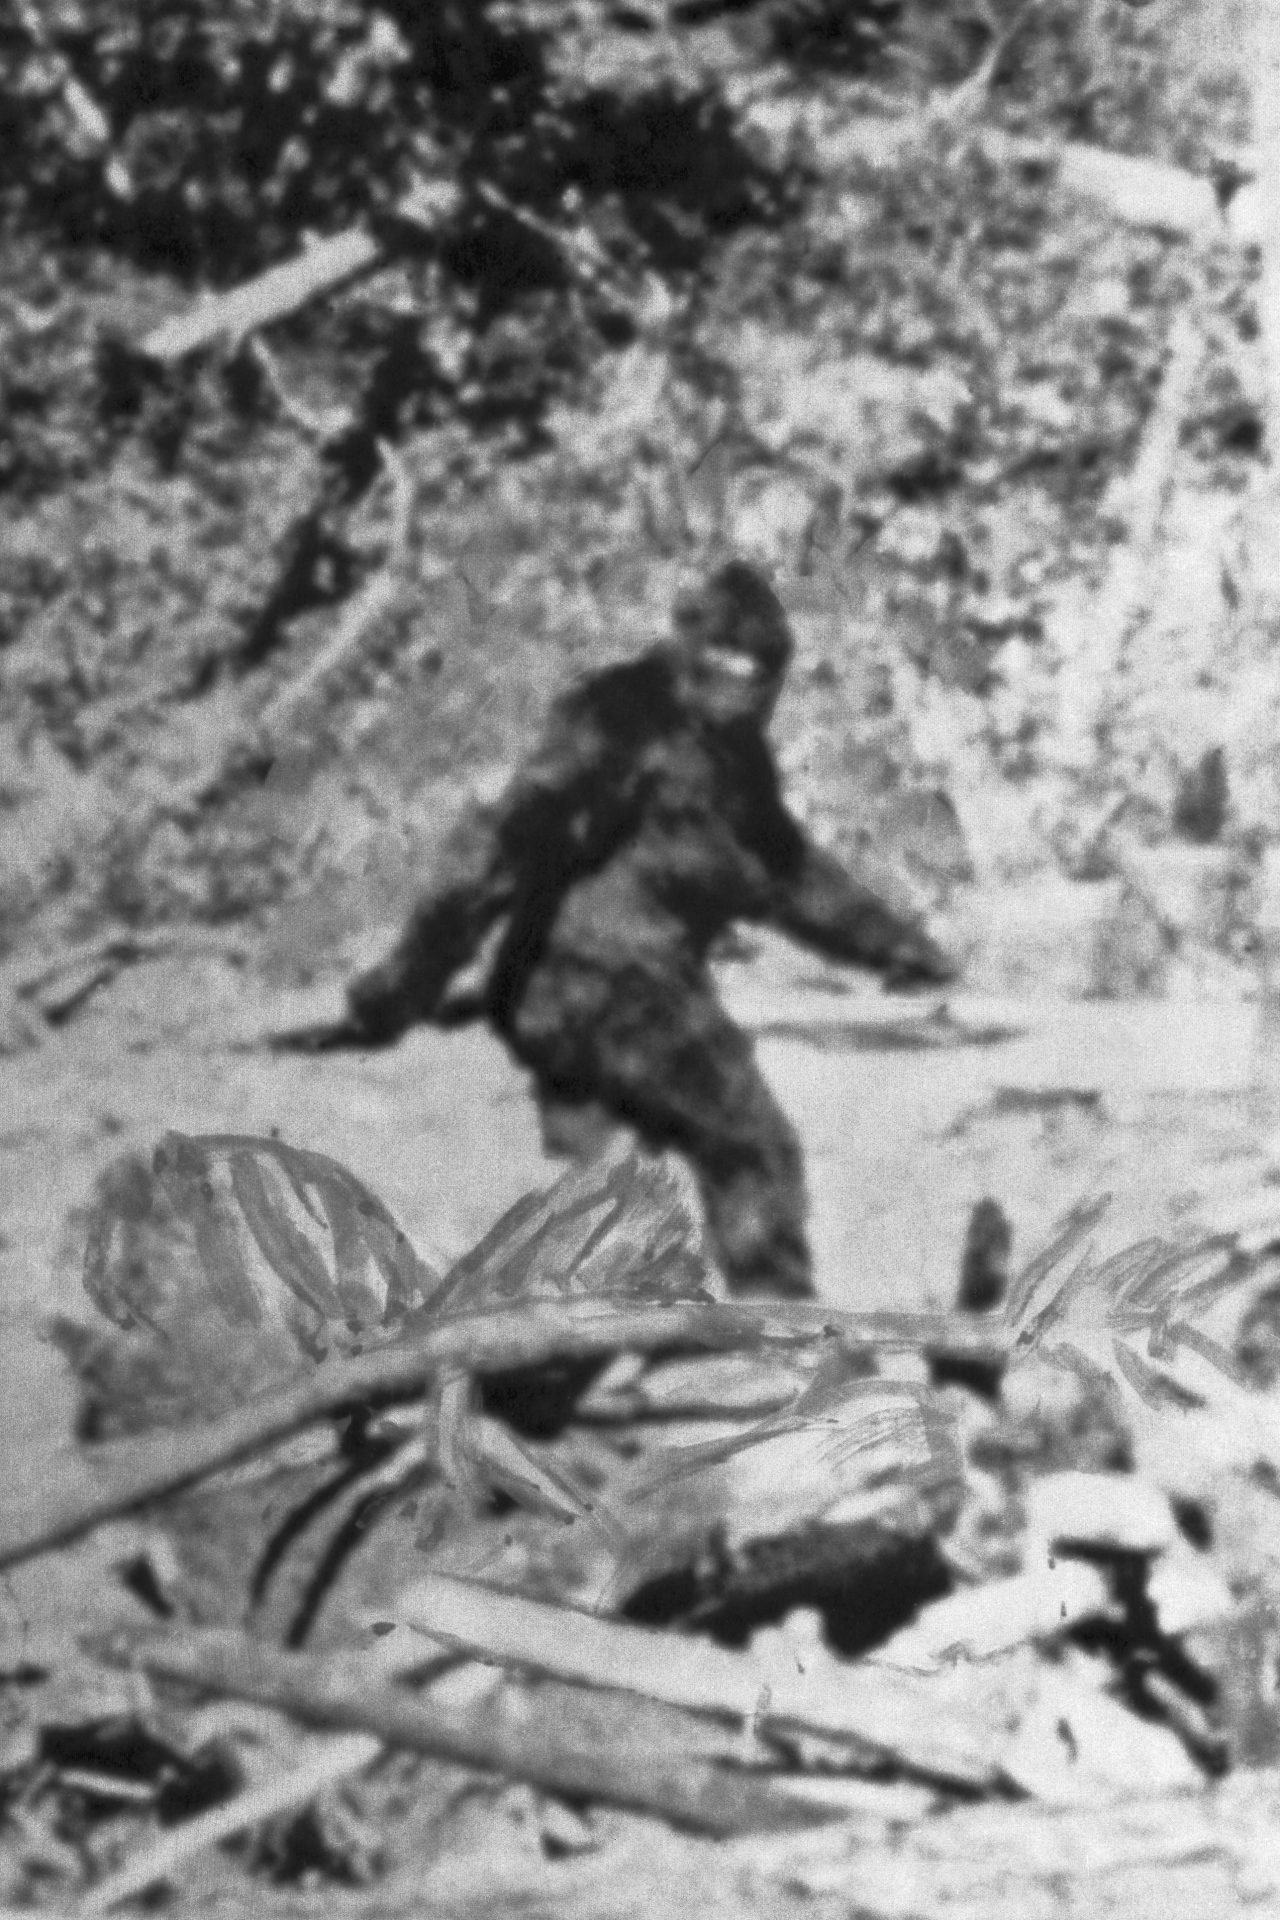 <p>In the 20th century there was still wild and unknown nature within the United States where, according to legend, Bigfoot took refuge. In Eureka, California, this image was captured, alleged graphic proof of the supposed existence of that mythical being.</p>